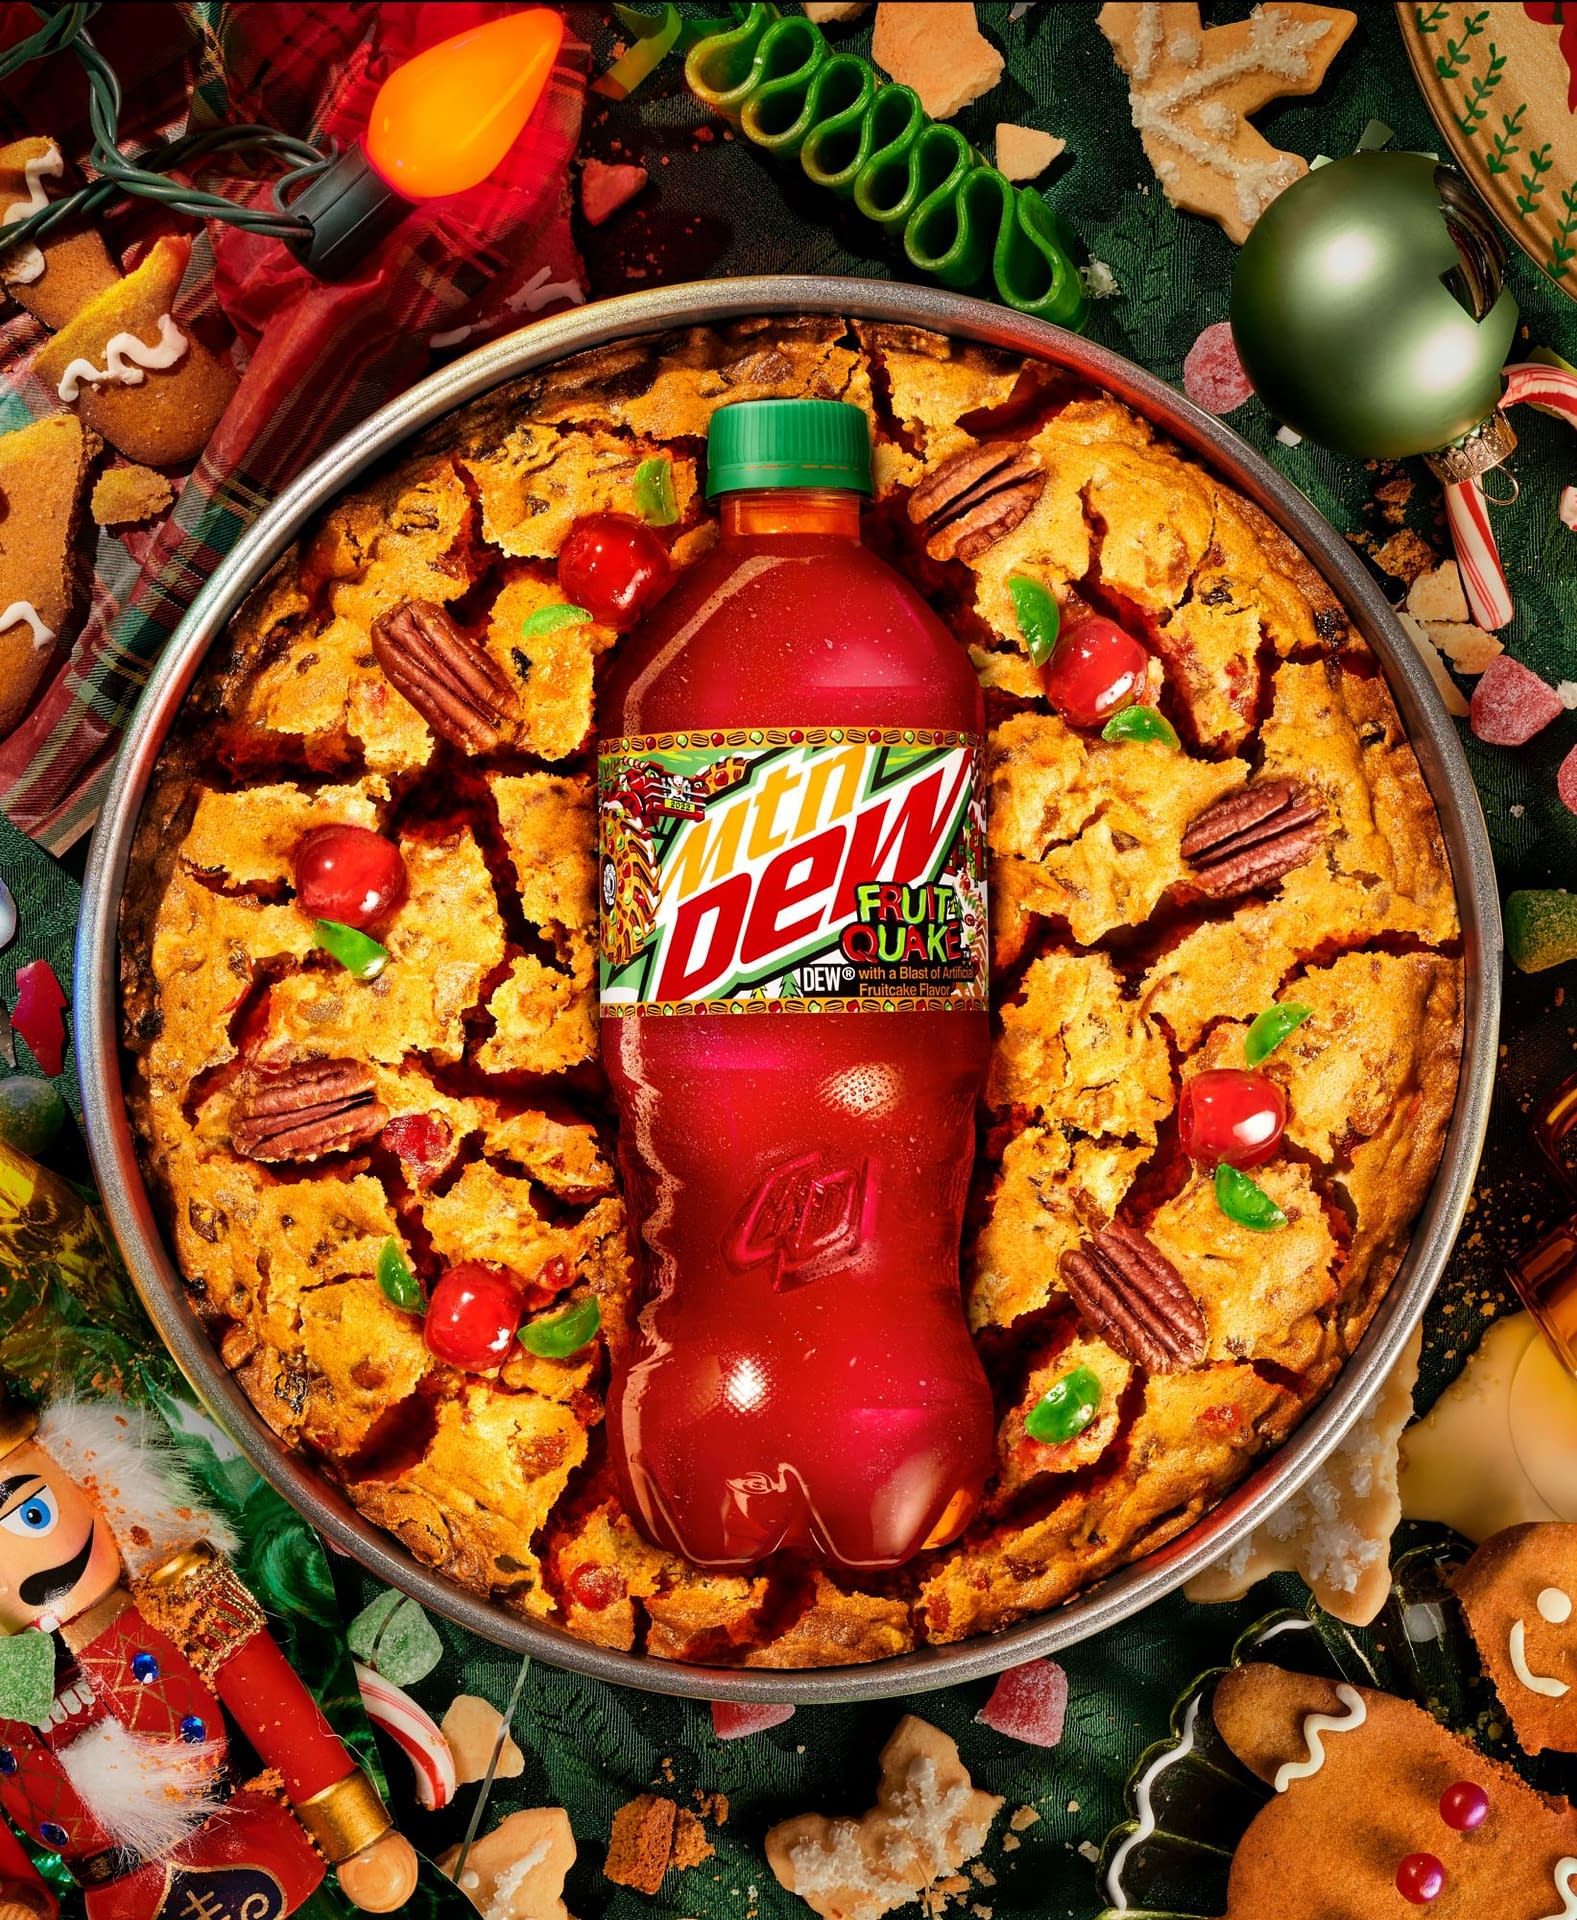 Mtn Dew's Capture the Holiday Season in a Bottle with Fruit Quake